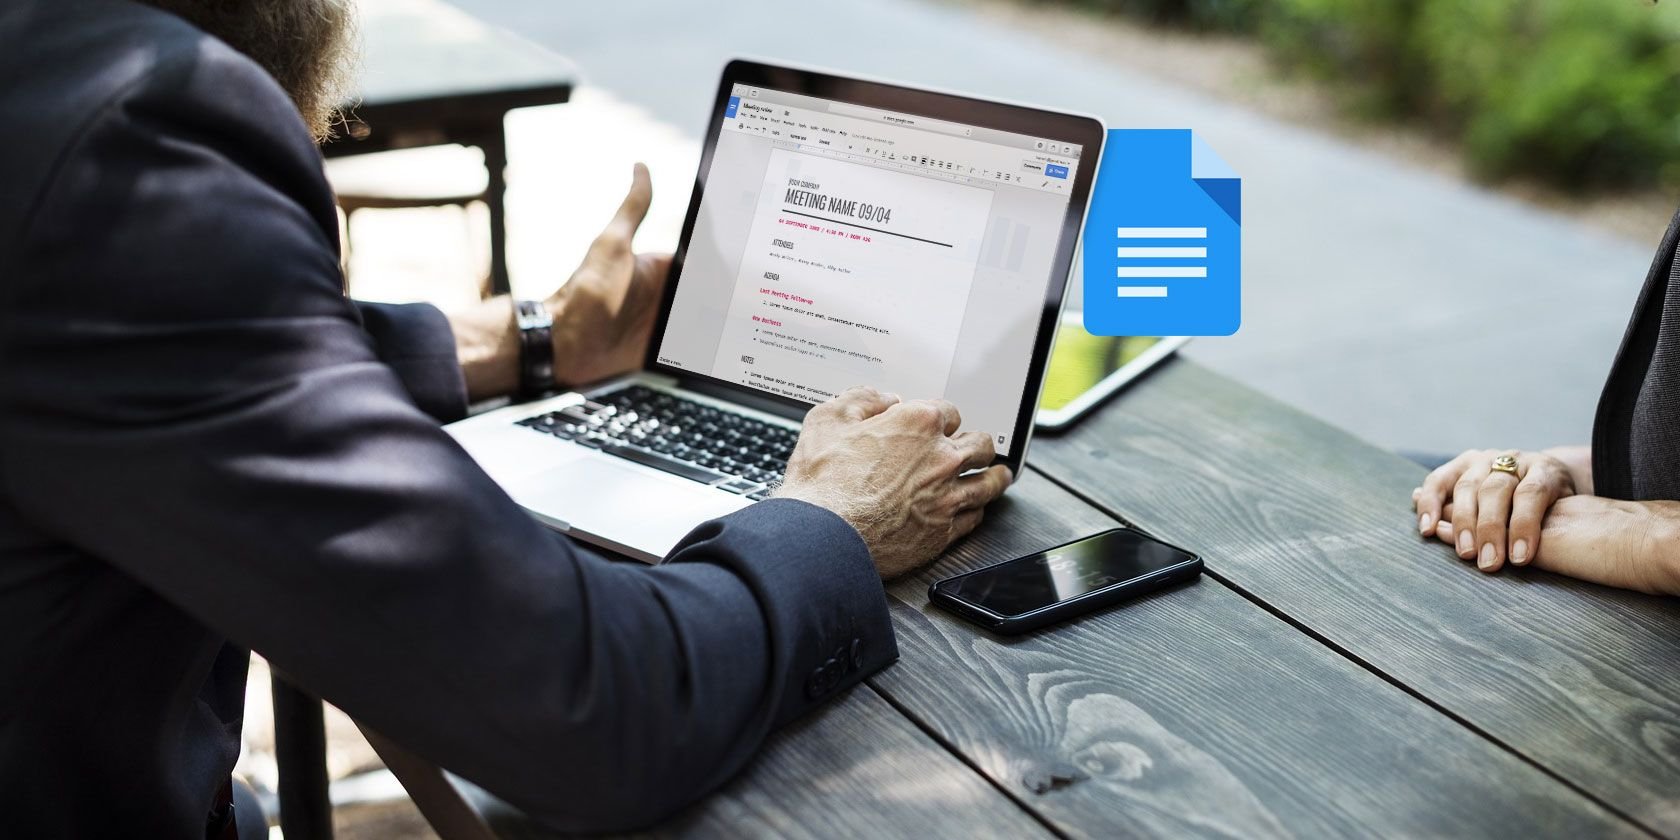 The 10 Best Google Docs Add-Ons for More Professional Documents